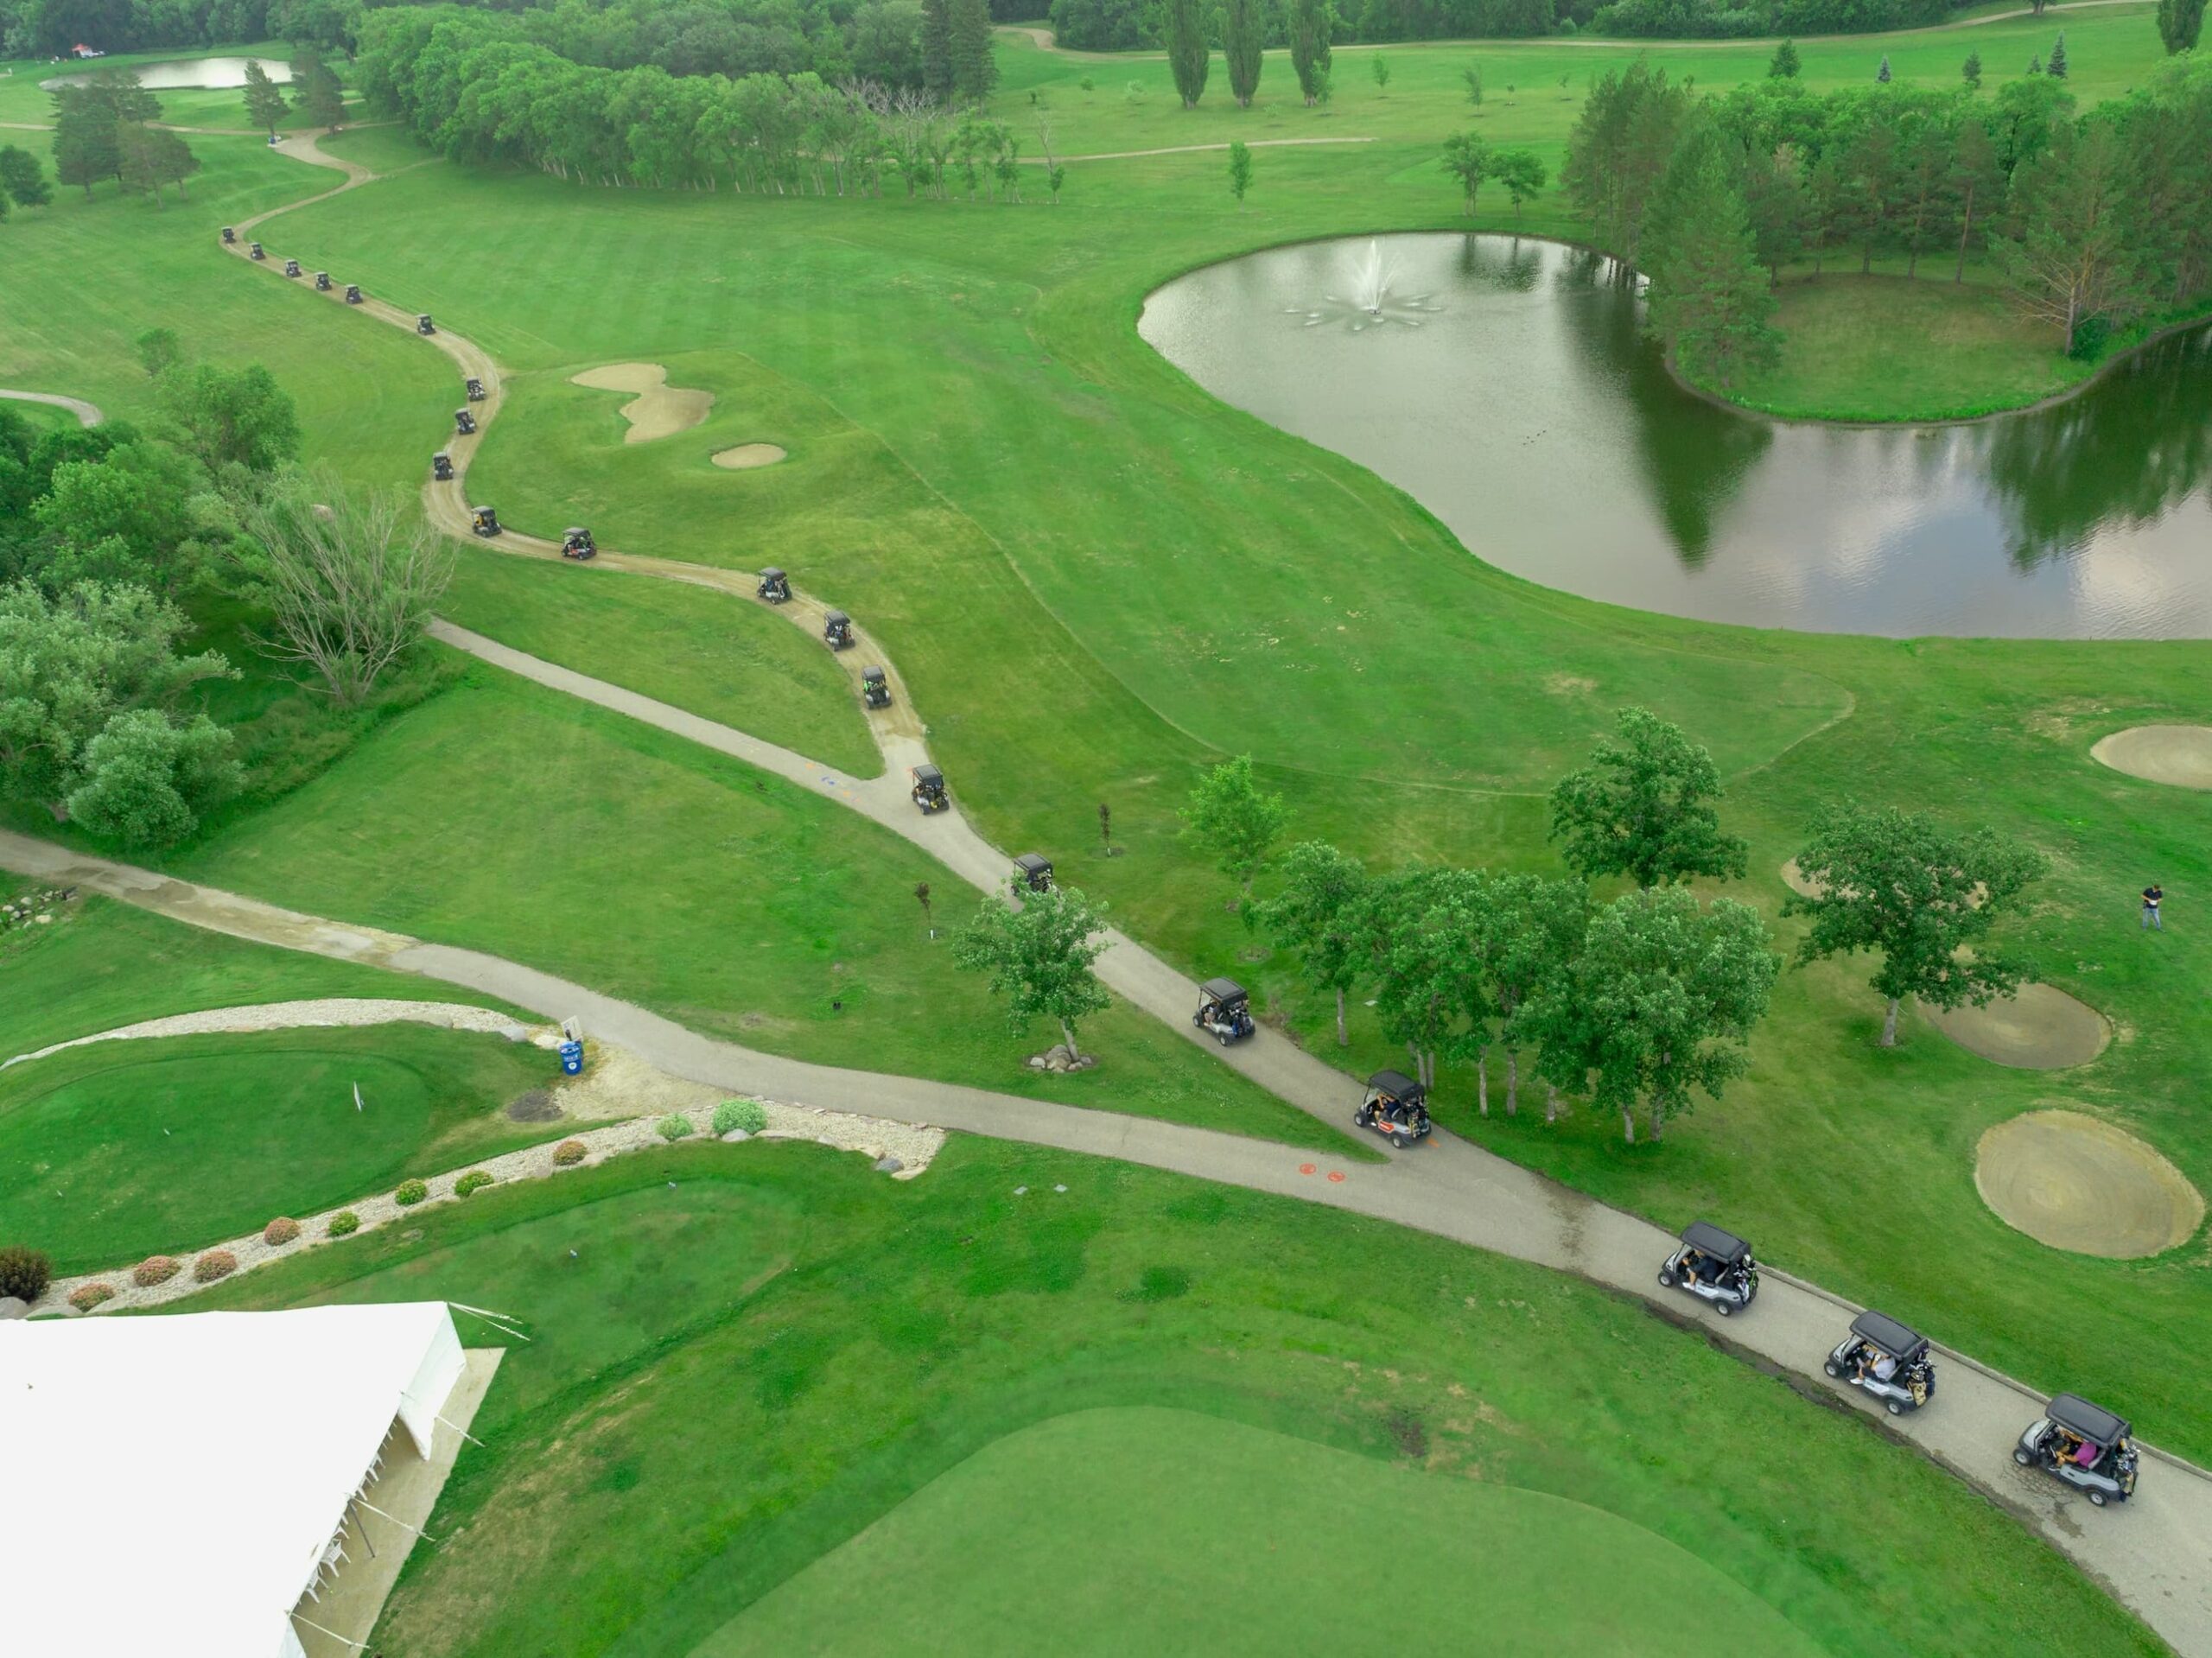 Aerial view of a row of golf carts driving down the path beside a pond